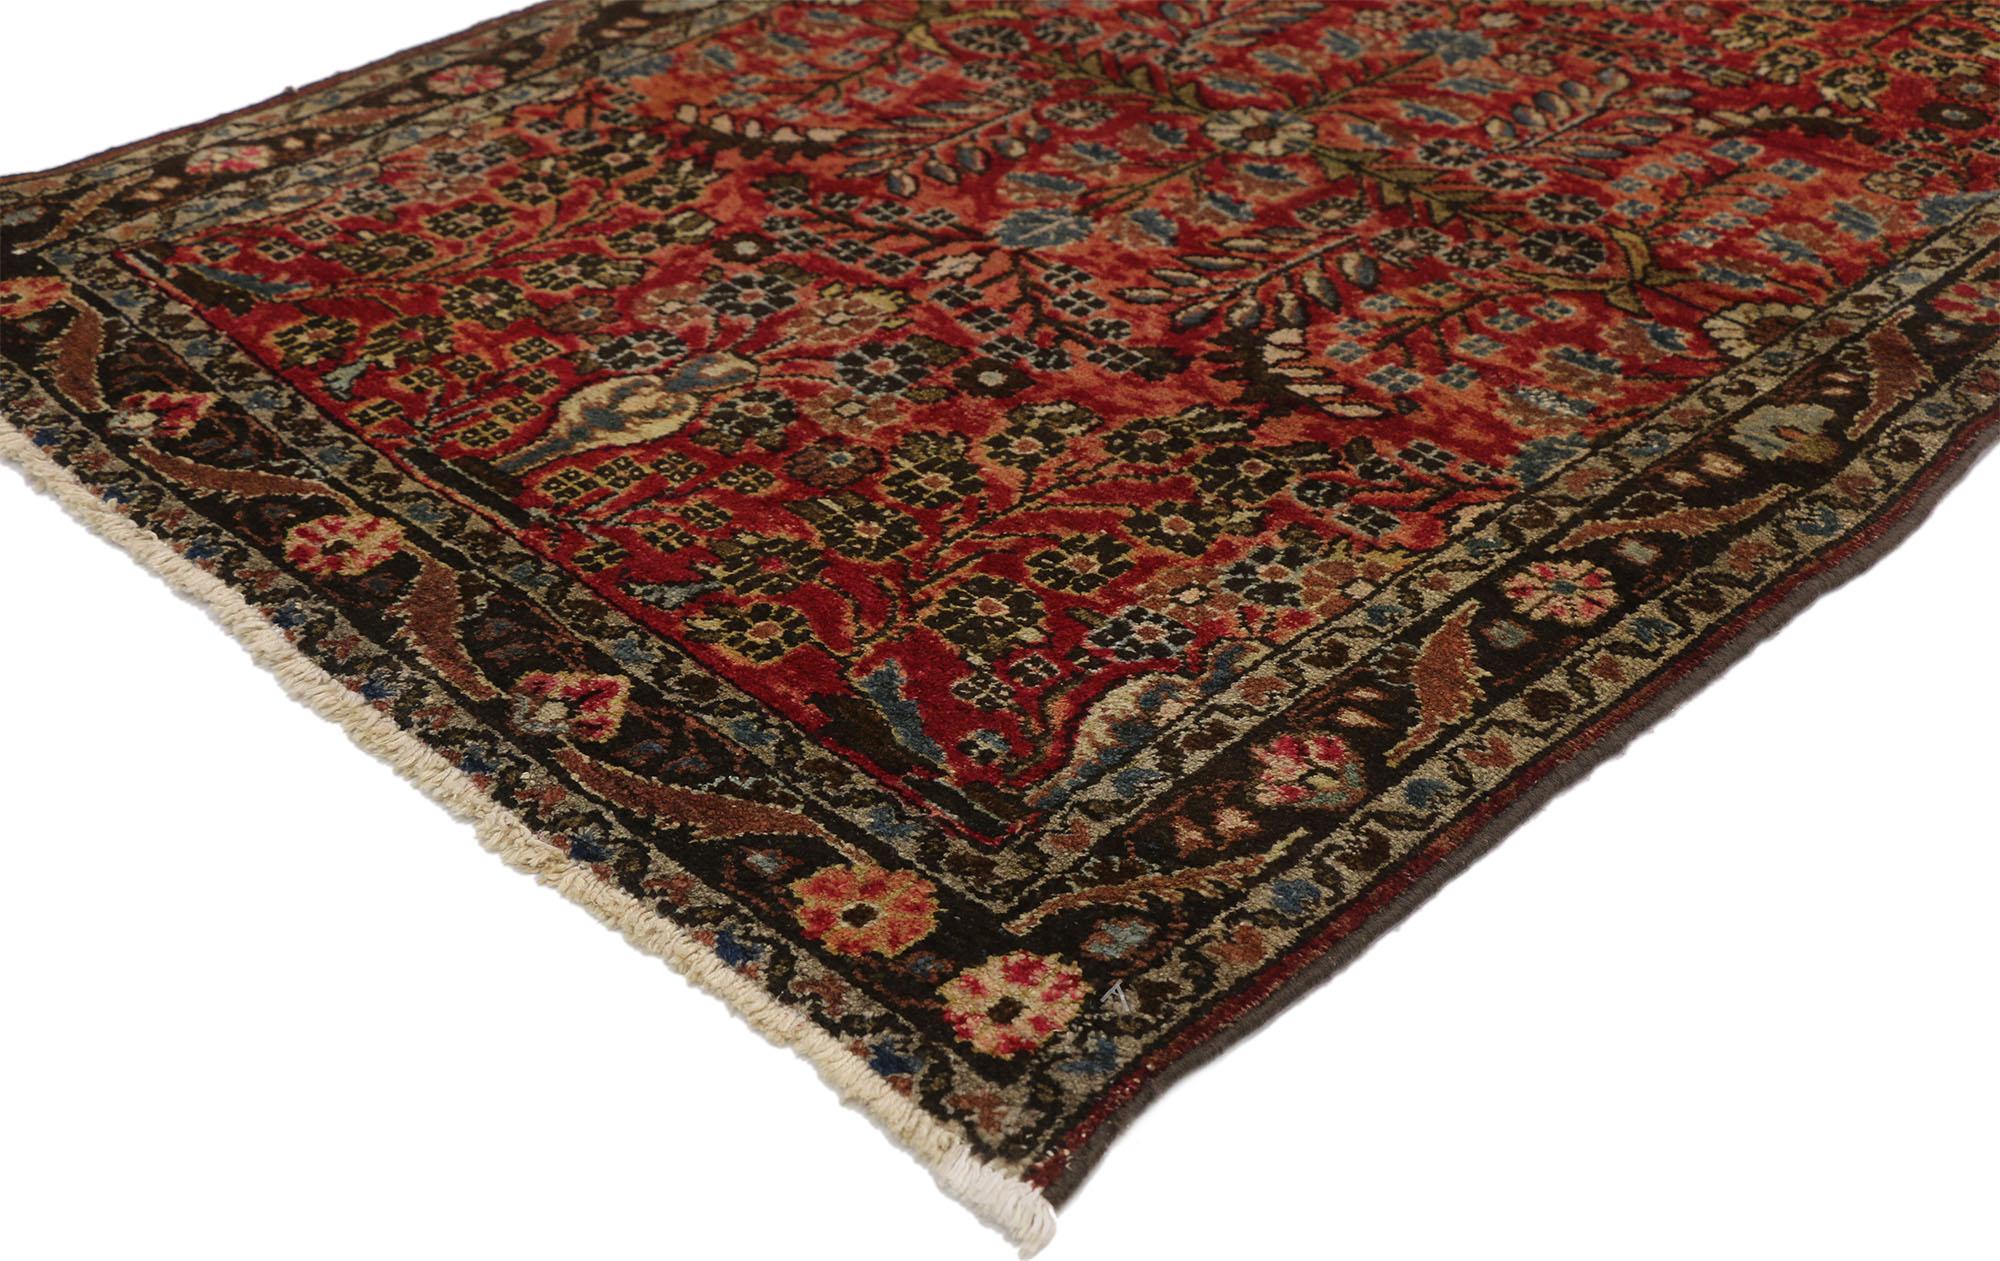 72334, antique Persian Hamadan rug with floral vase Motif and Traditional style. Poised to impress, this hand knotted wool antique Persian Hamadan rug features a Sarouk inspired floral design. At either end of the rug are urn shaped vases with